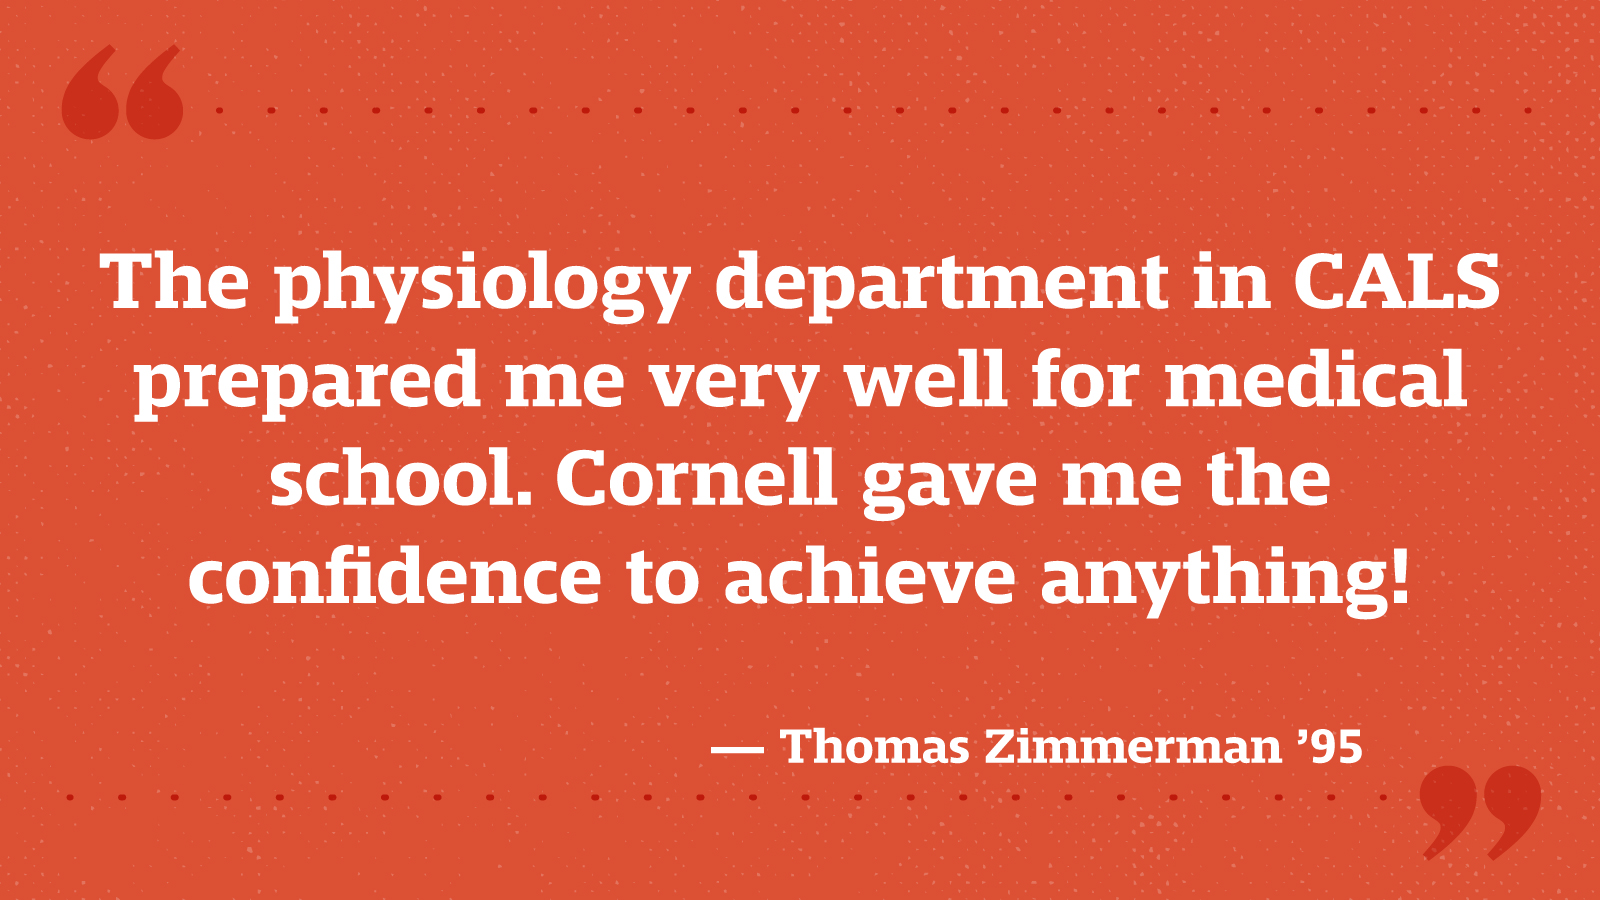 The physiology department in CALS prepared me very well for medical school. Cornell gave me the confidence to achieve anything! — Thomas Zimmerman ’95